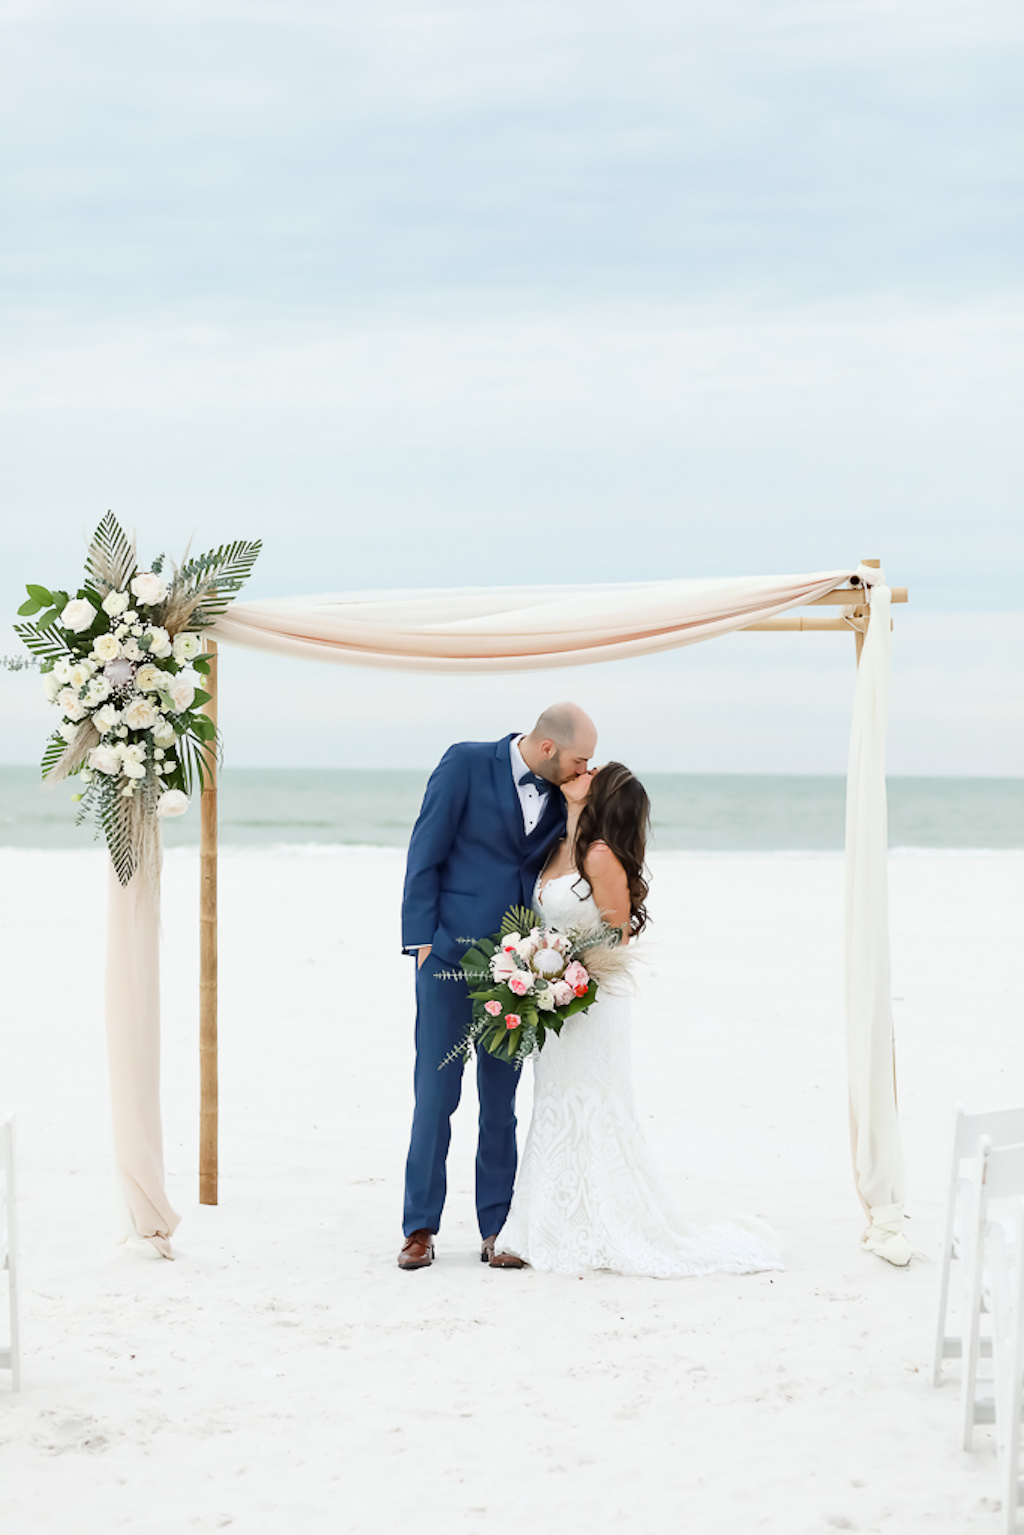 Bride and Groom Intimate Wedding Portrait on the Beach, Bamboo Bamboo Ceremony Arch with Tropical Inspired Floral Arrangement | Photographer Lifelong Photography Studios | Hilton Clearwater Beach